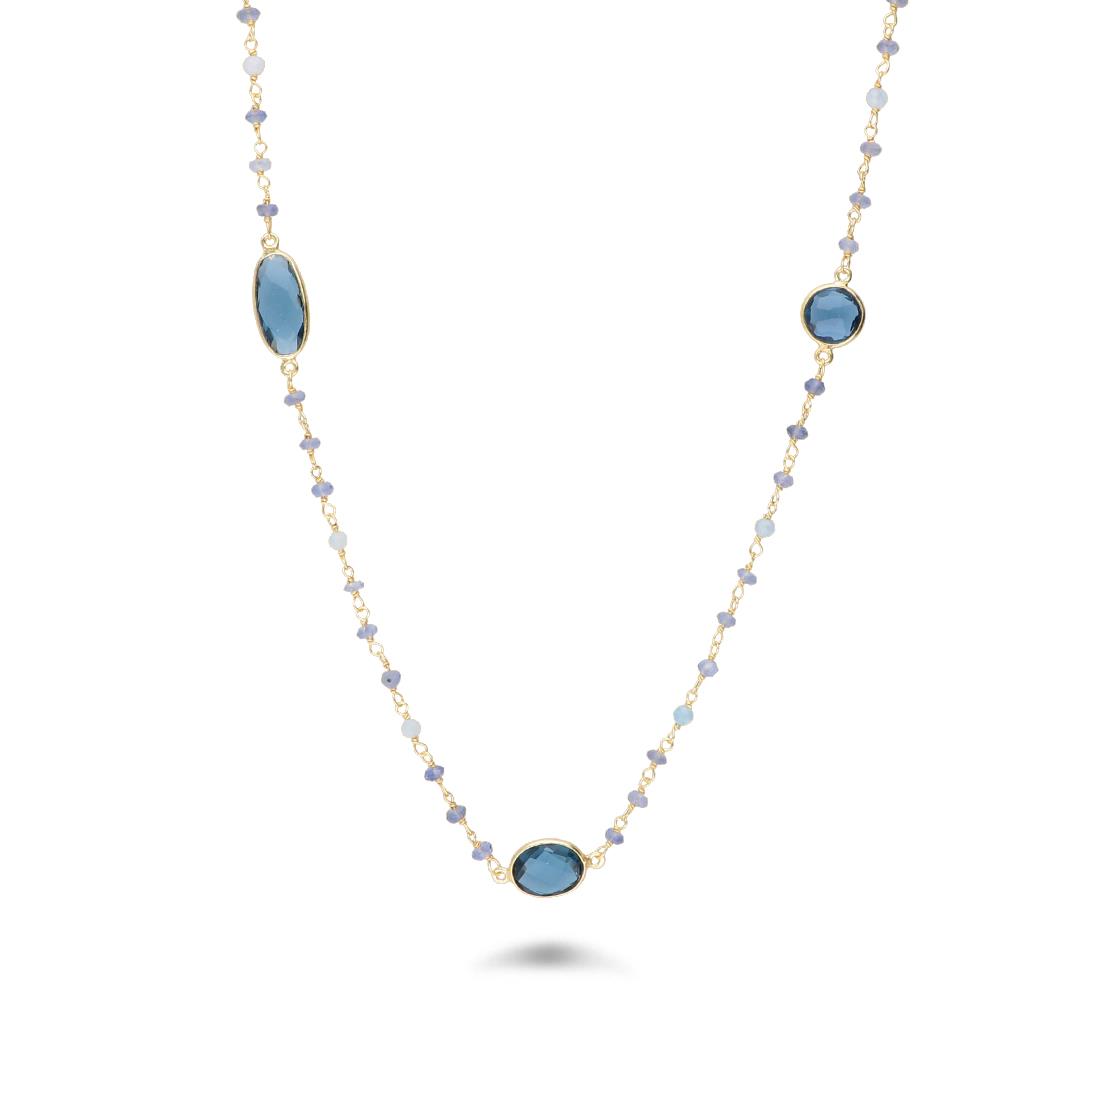 Necklace with natural stones - ALFIERI & ST. JOHN 925